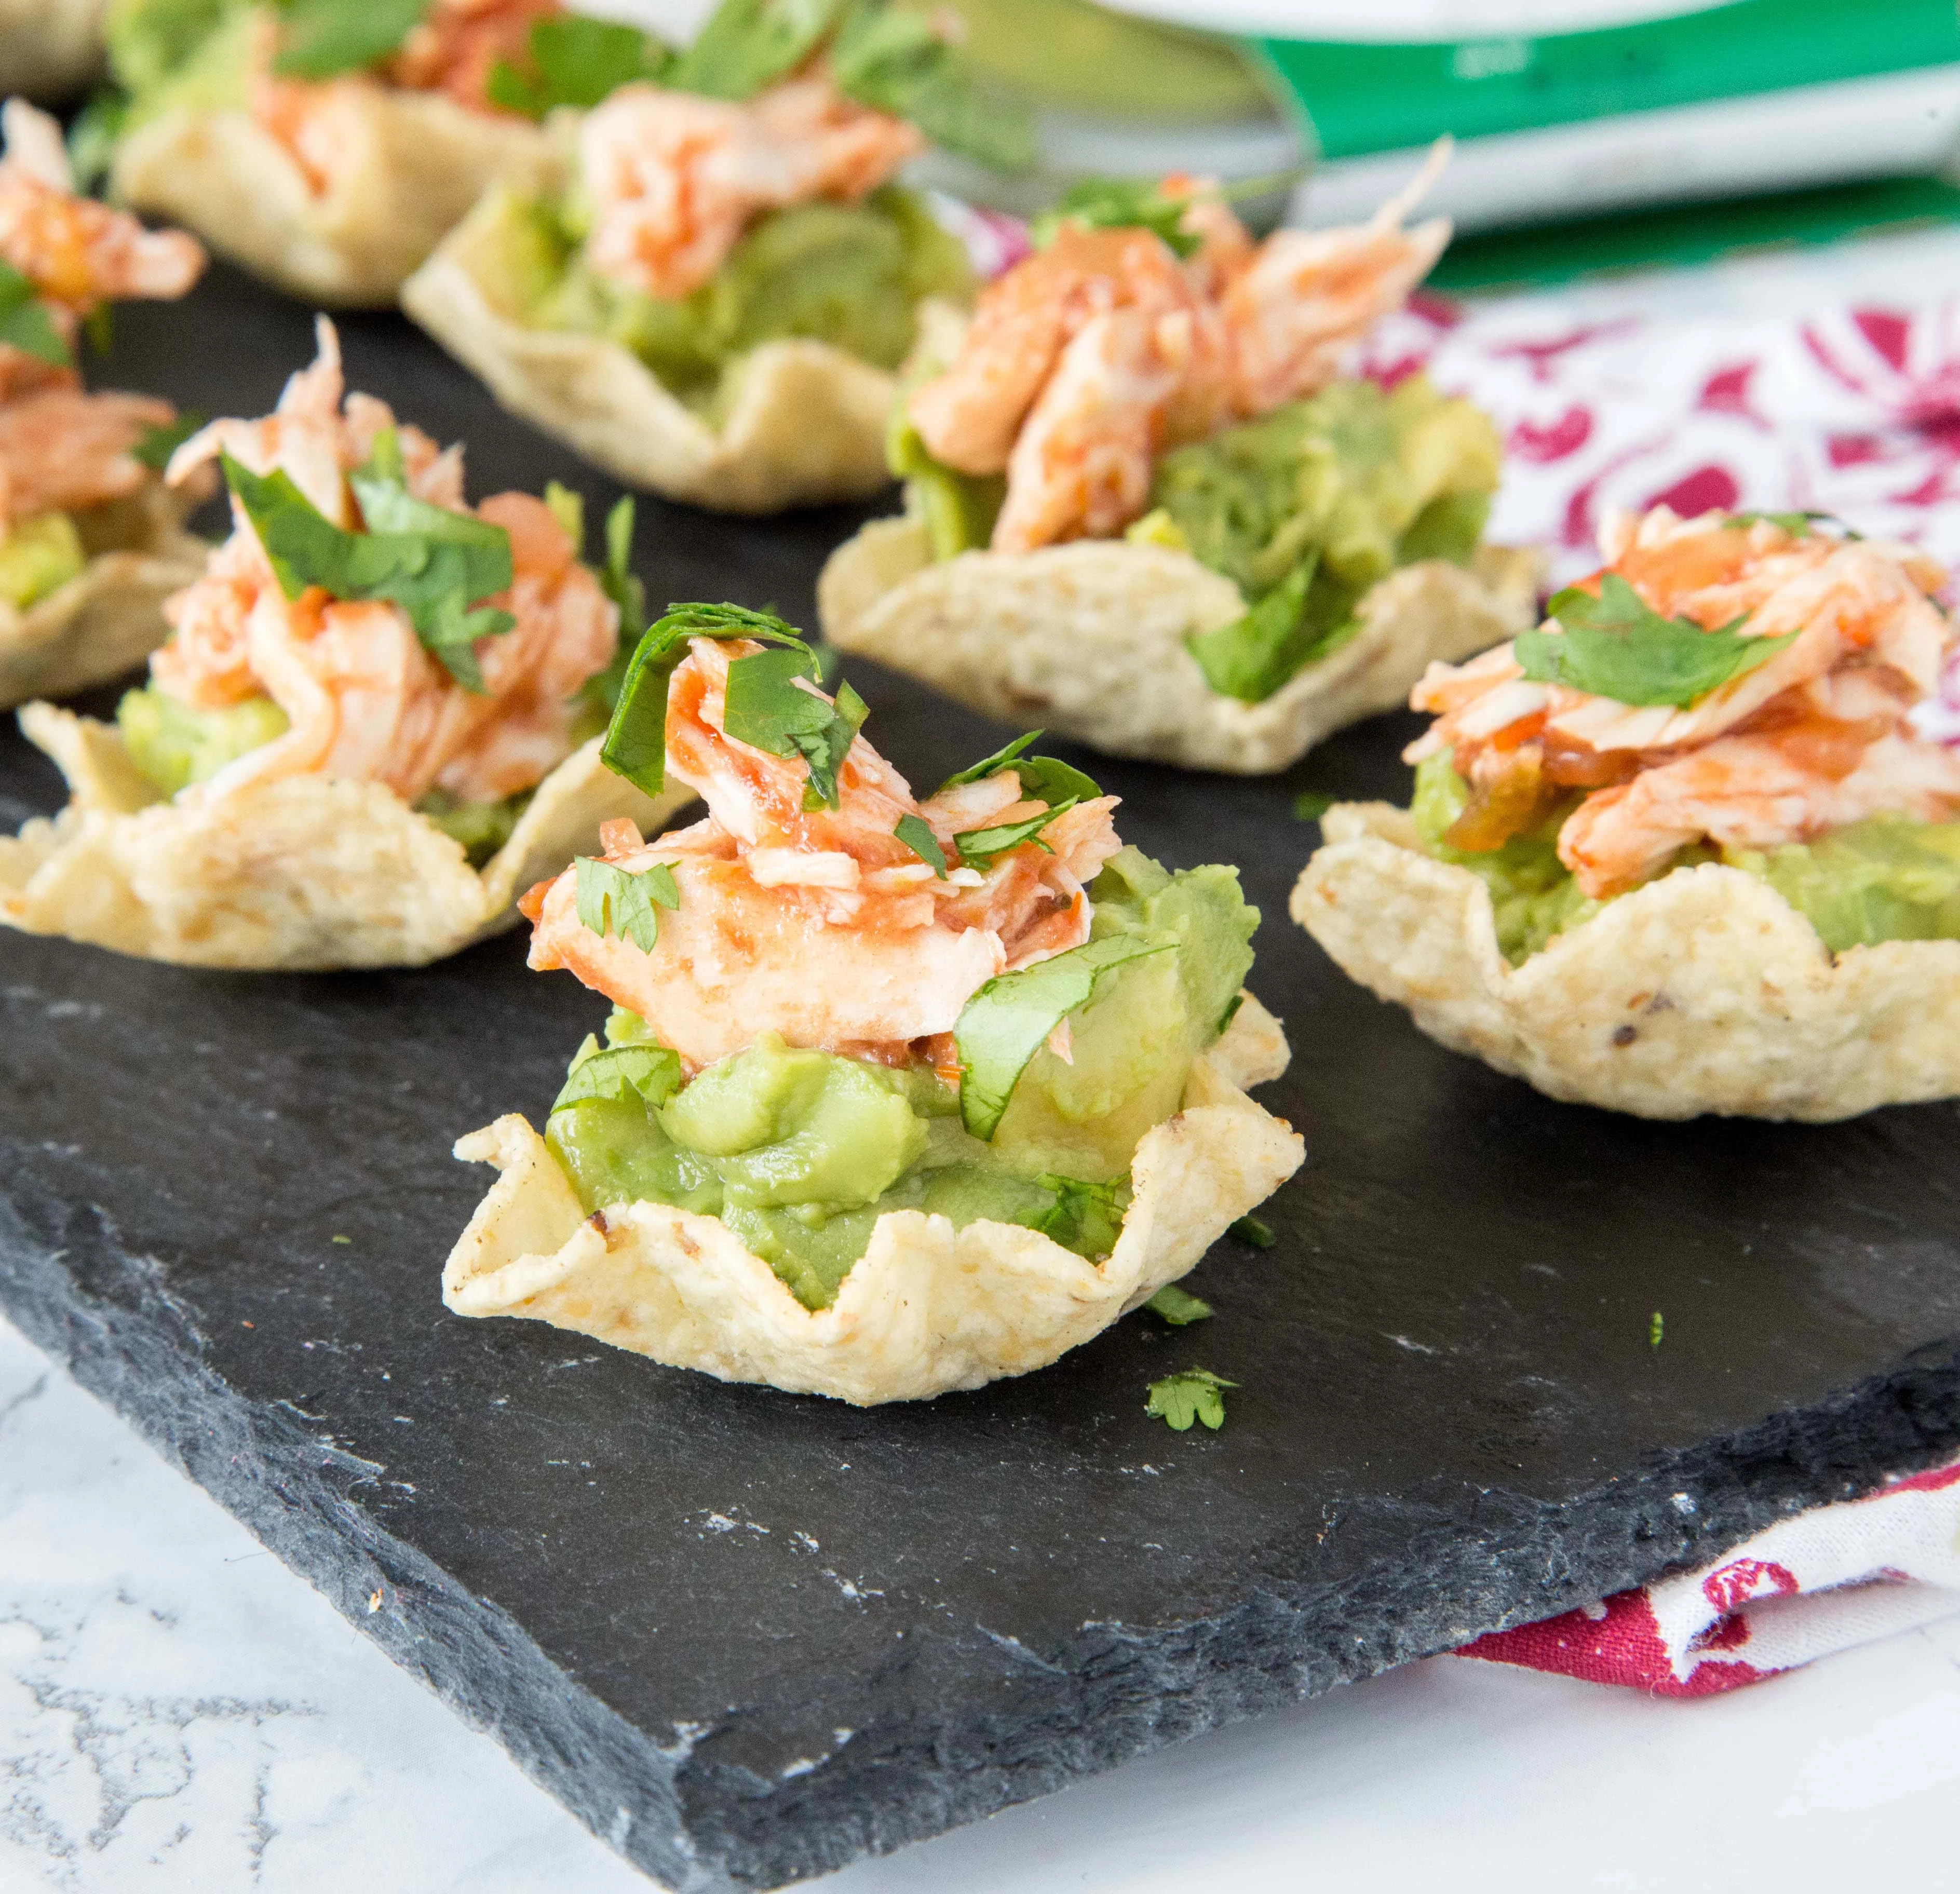 Guacamole Chicken Bites - Need a fun chicken appetizer for a party or get together.  These are filled with delicious guacamole, spicy salsa chicken, and topped with cilantro.  Great for snacking or entertaining!  